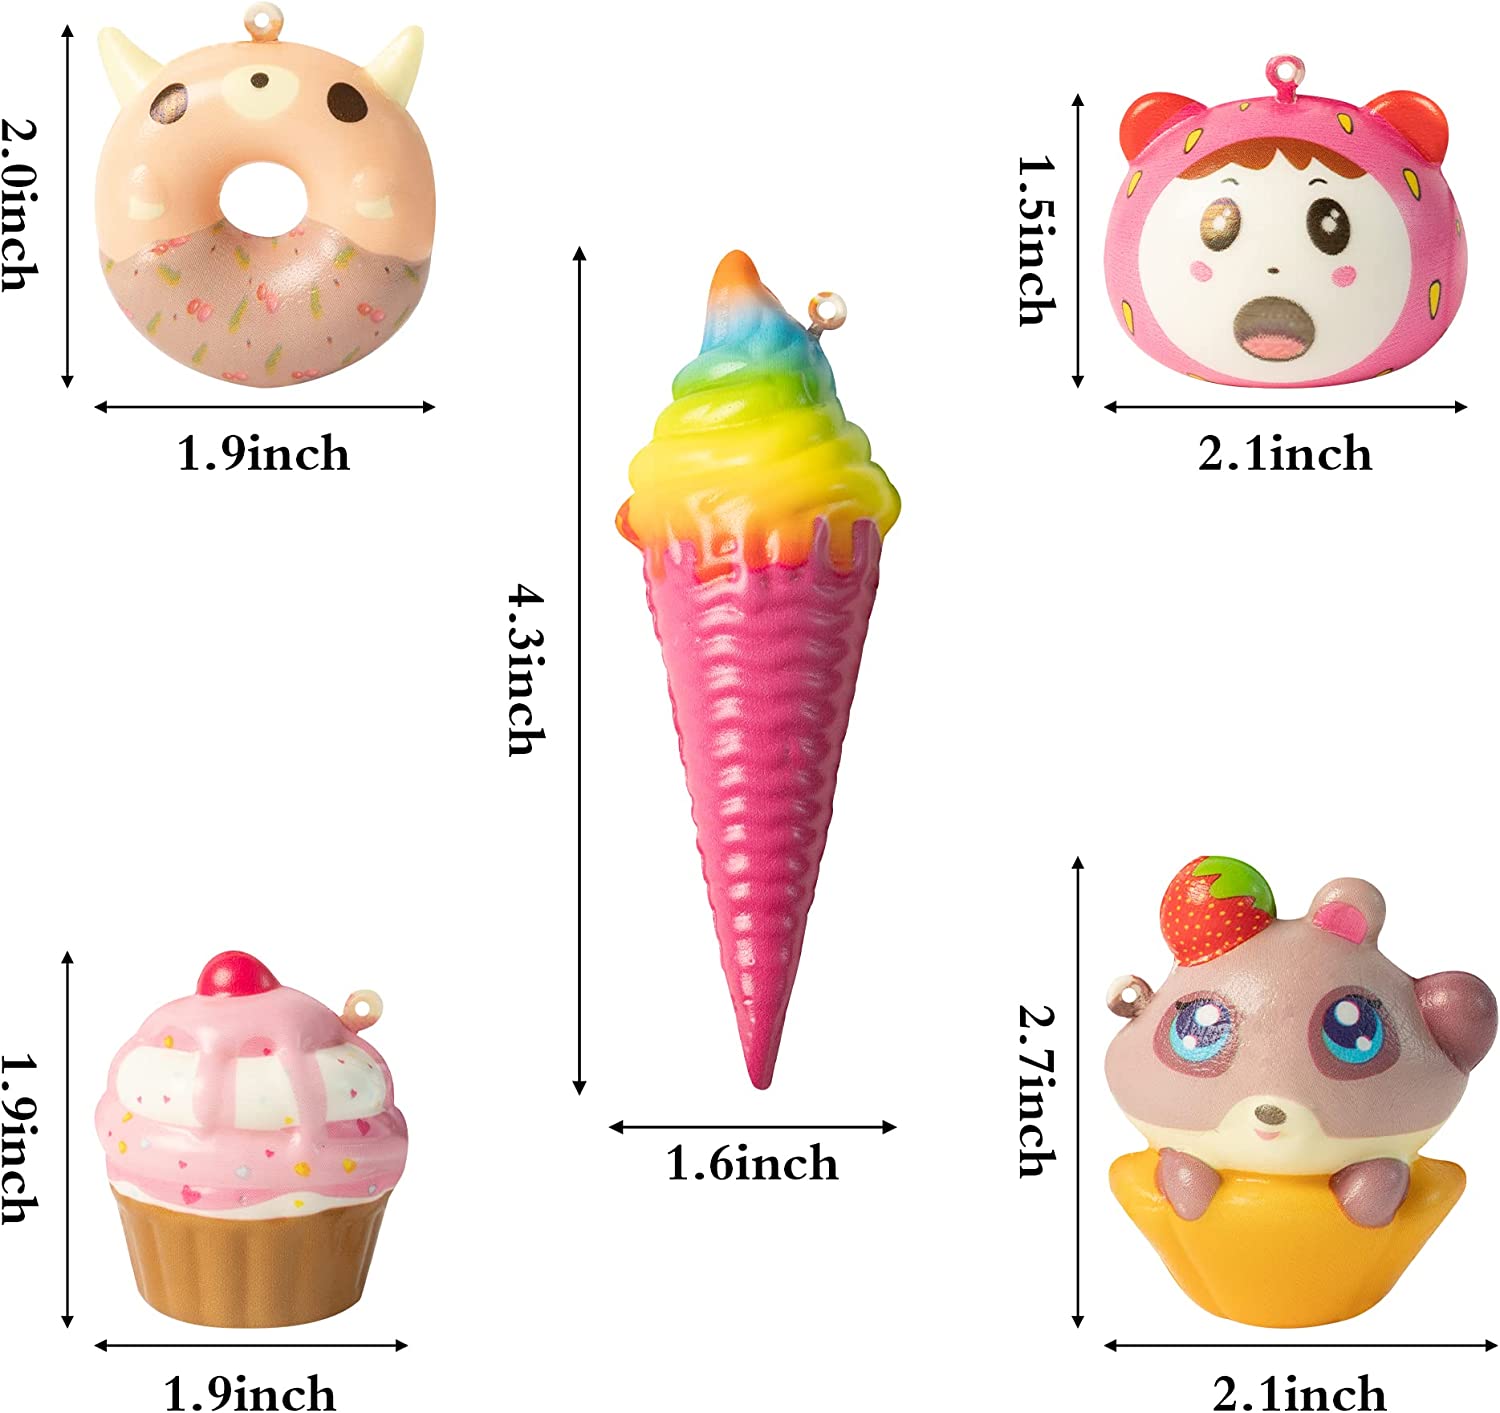 Slumpmässiga 30st Squeeze Toys Cream Scented Slow Rising Kawaii Squeeze Toys Medium Mini Simulation Lovely Toy Phone Rems Goodie Bag Egg Filler